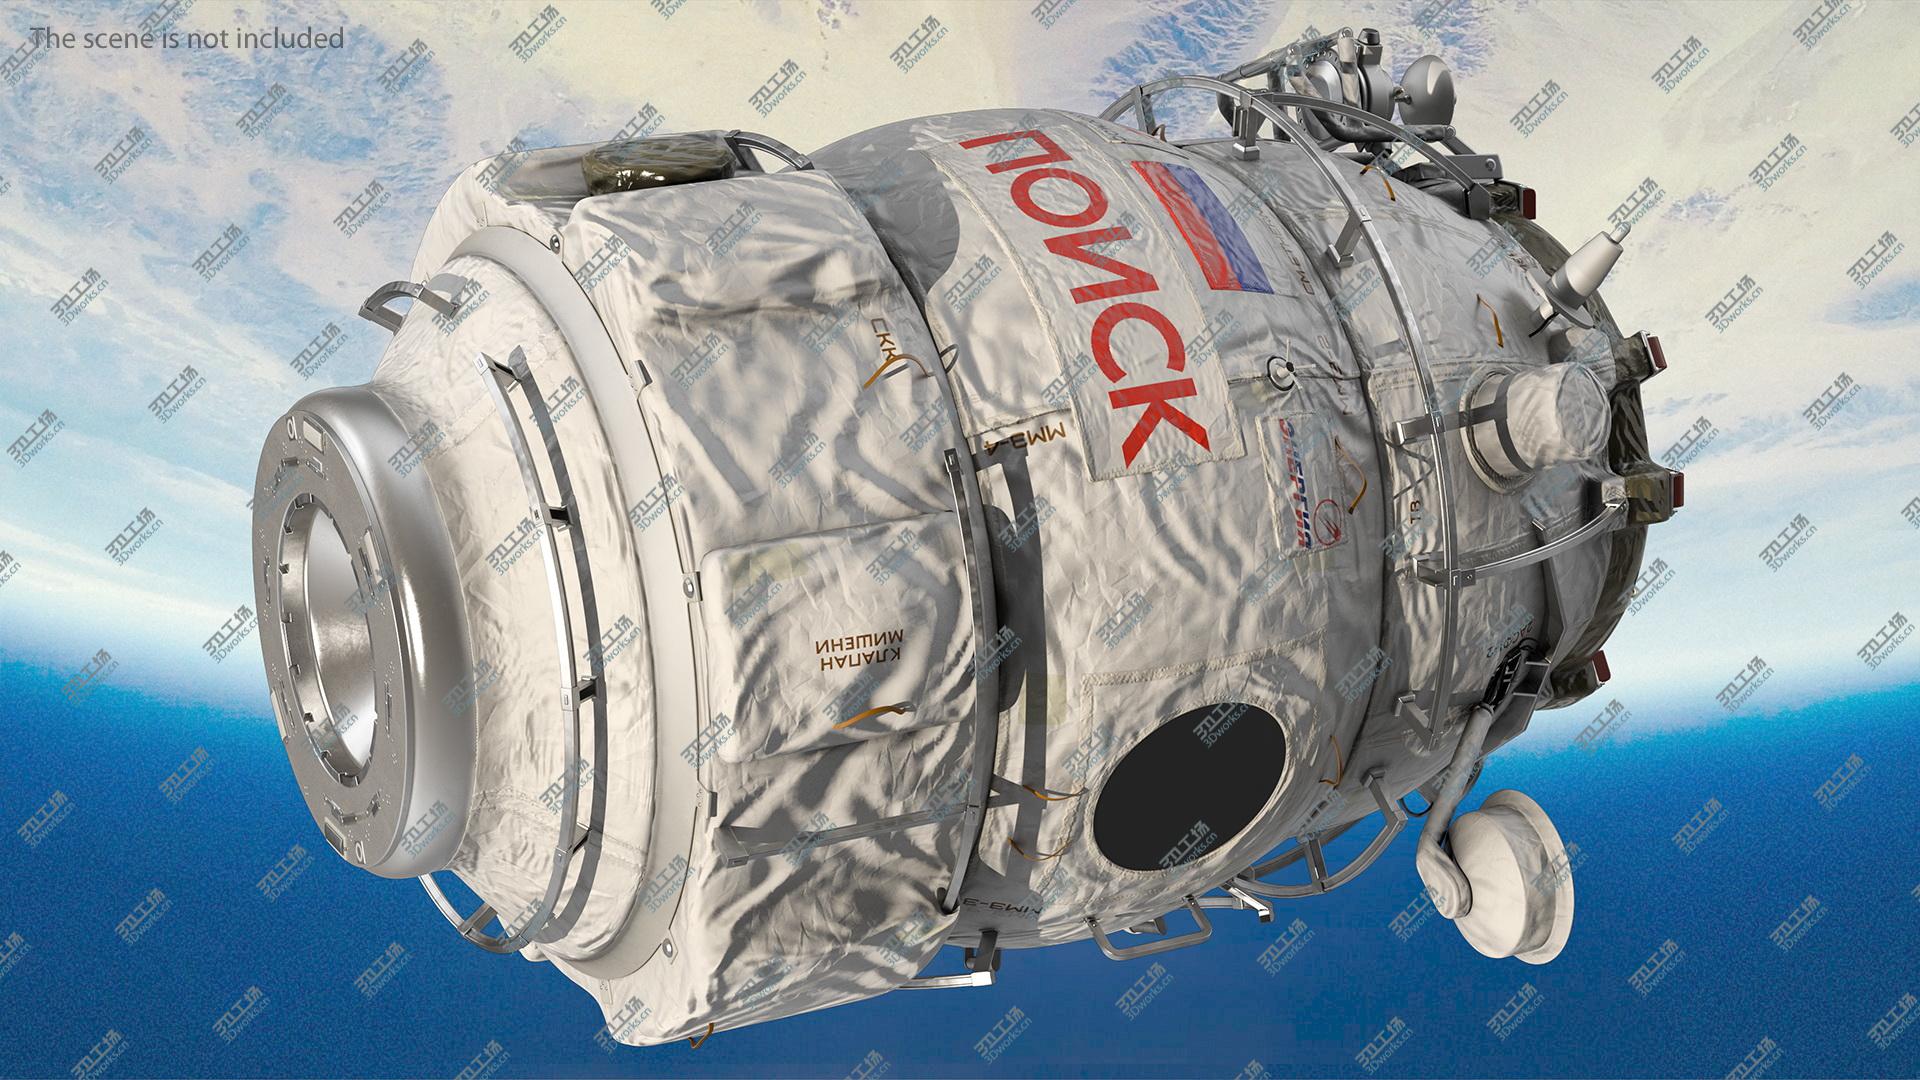 images/goods_img/202104094/3D ISS Module Poisk Mini Research Module 2/5.jpg